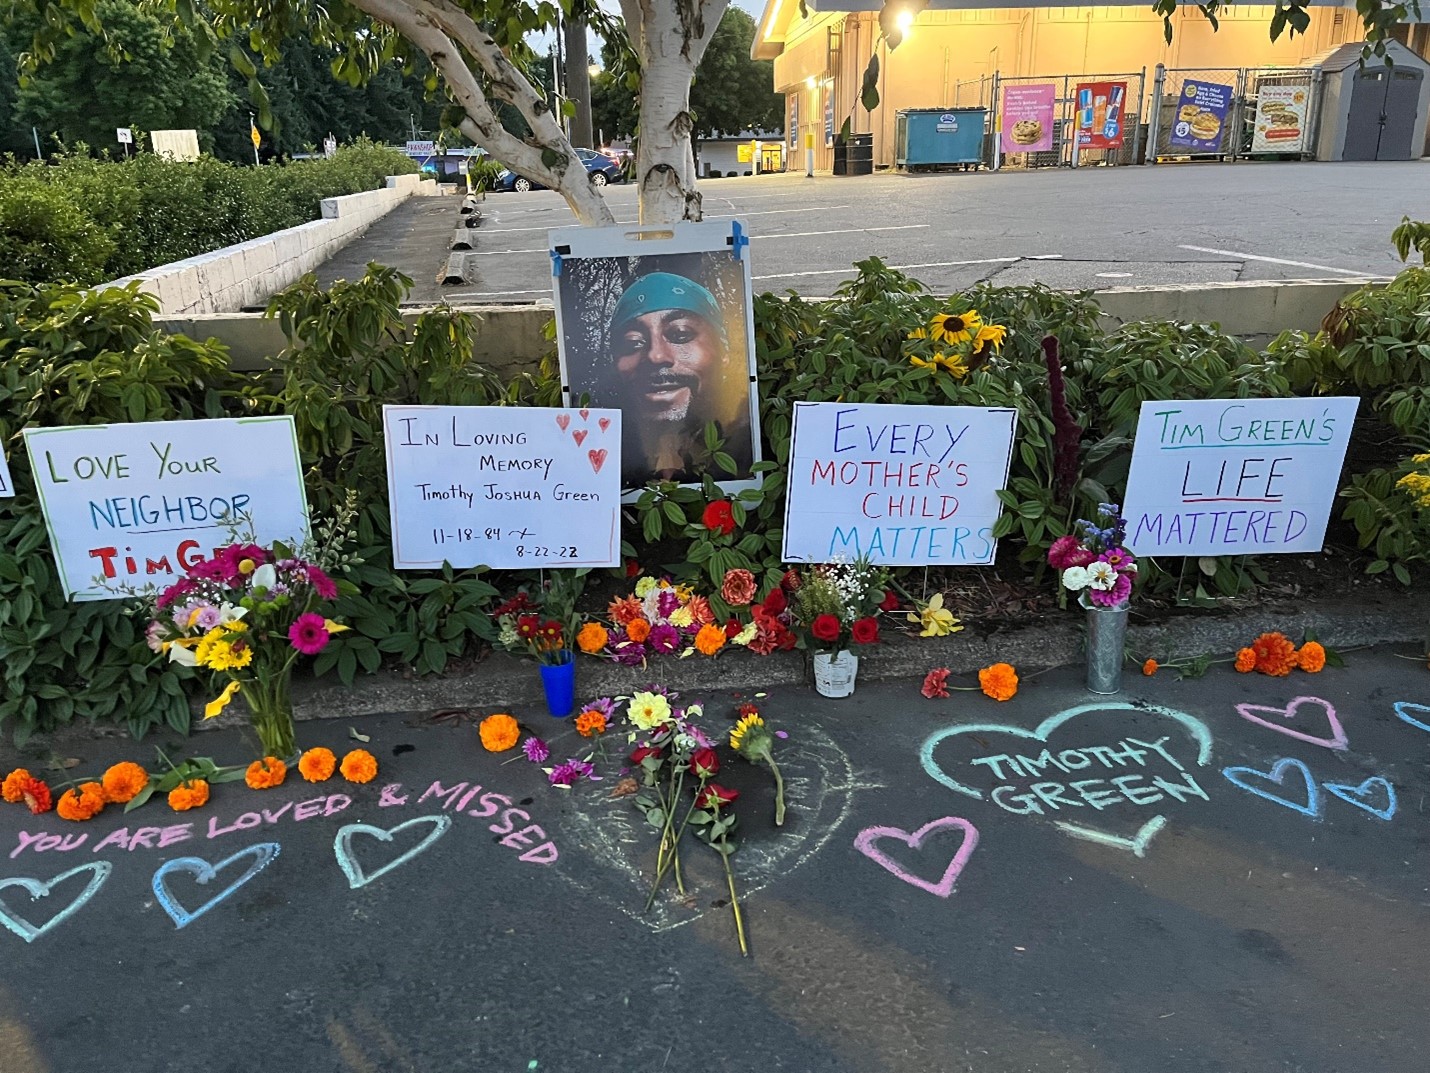 Tribute to Timothy Green, killed by Olympia Police in August 2022.